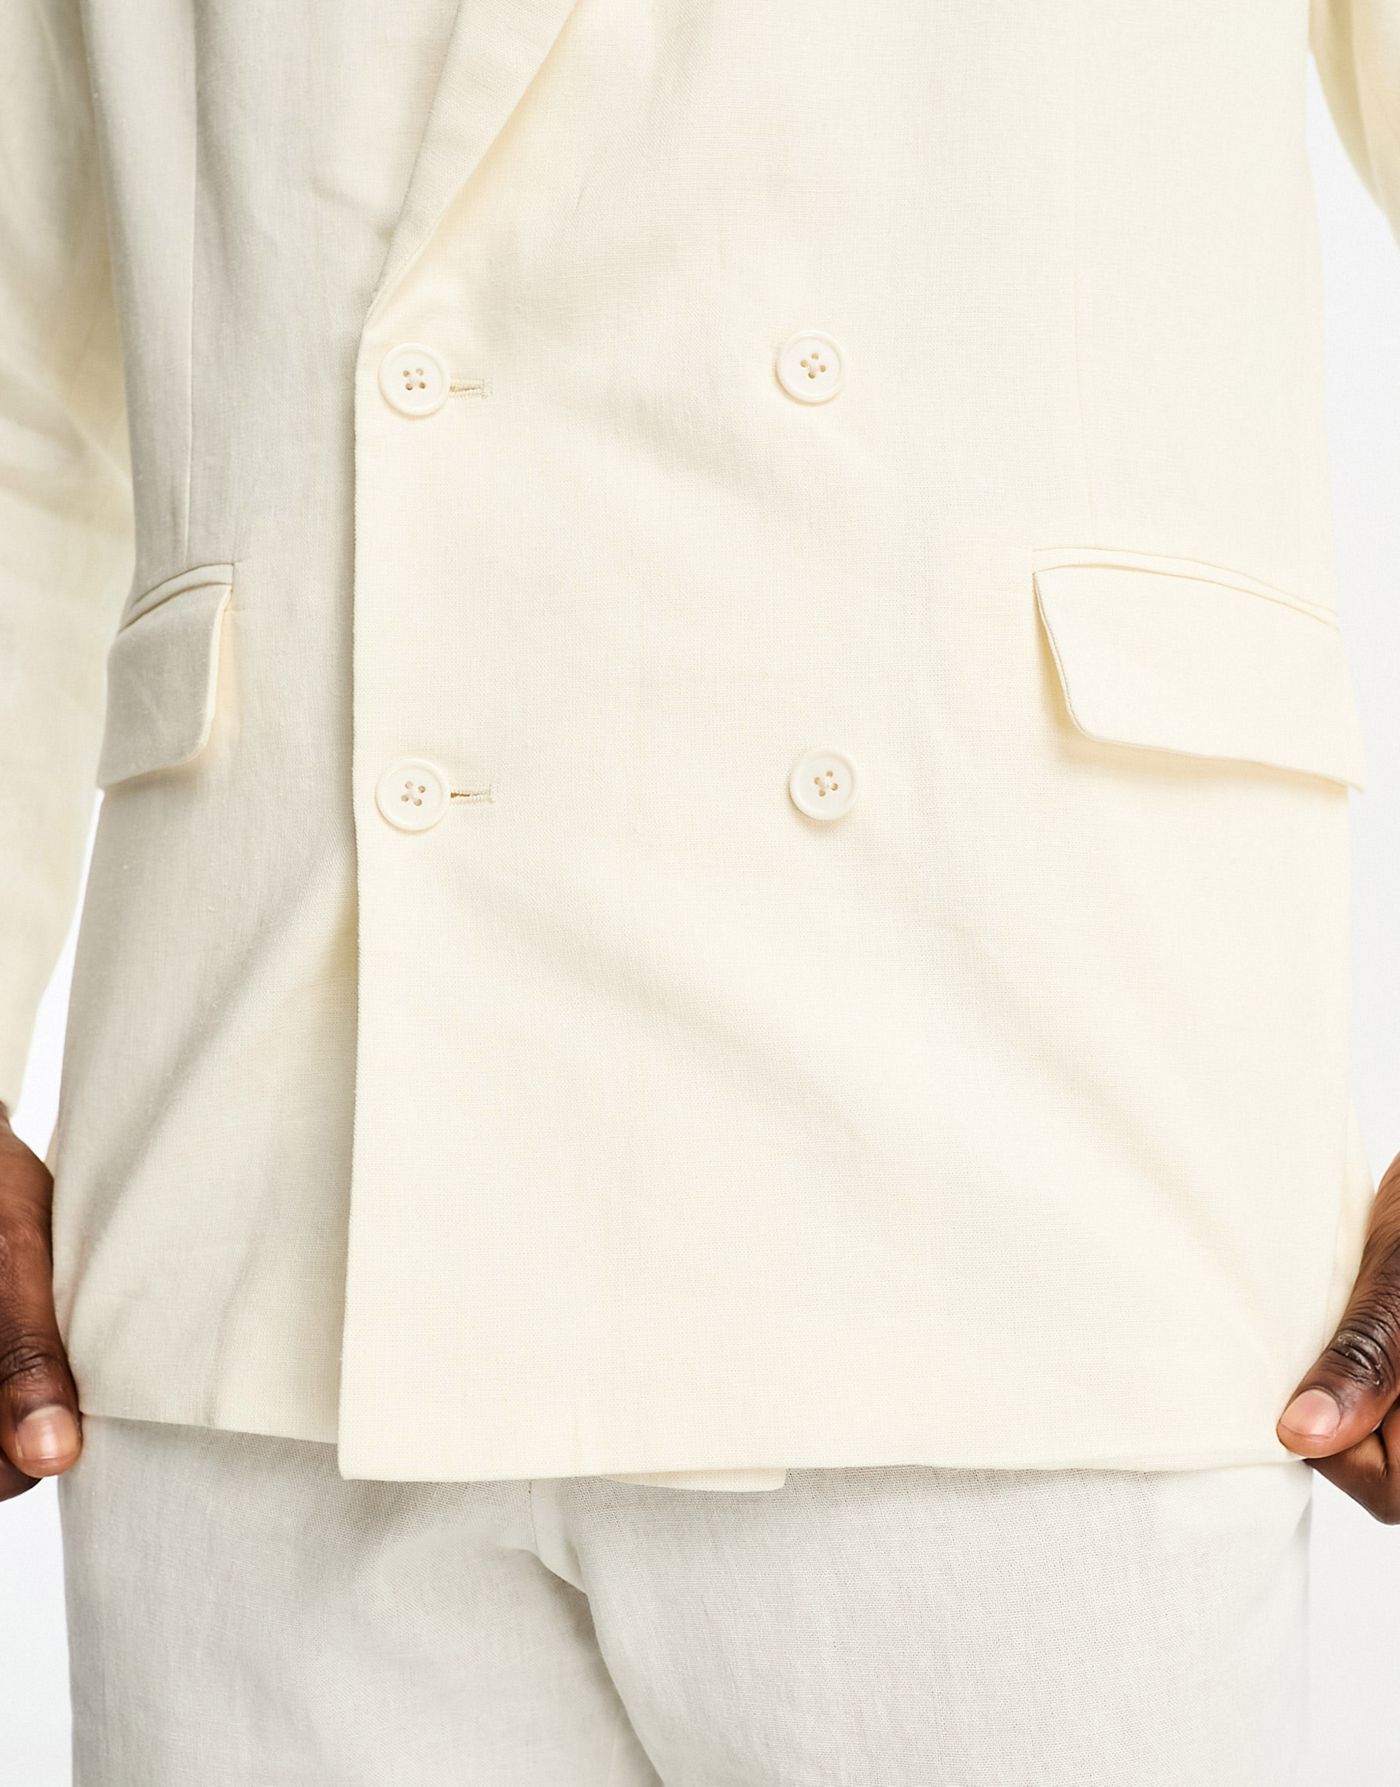 ADPT relaxed fit double breasted suit jacket in off white linen